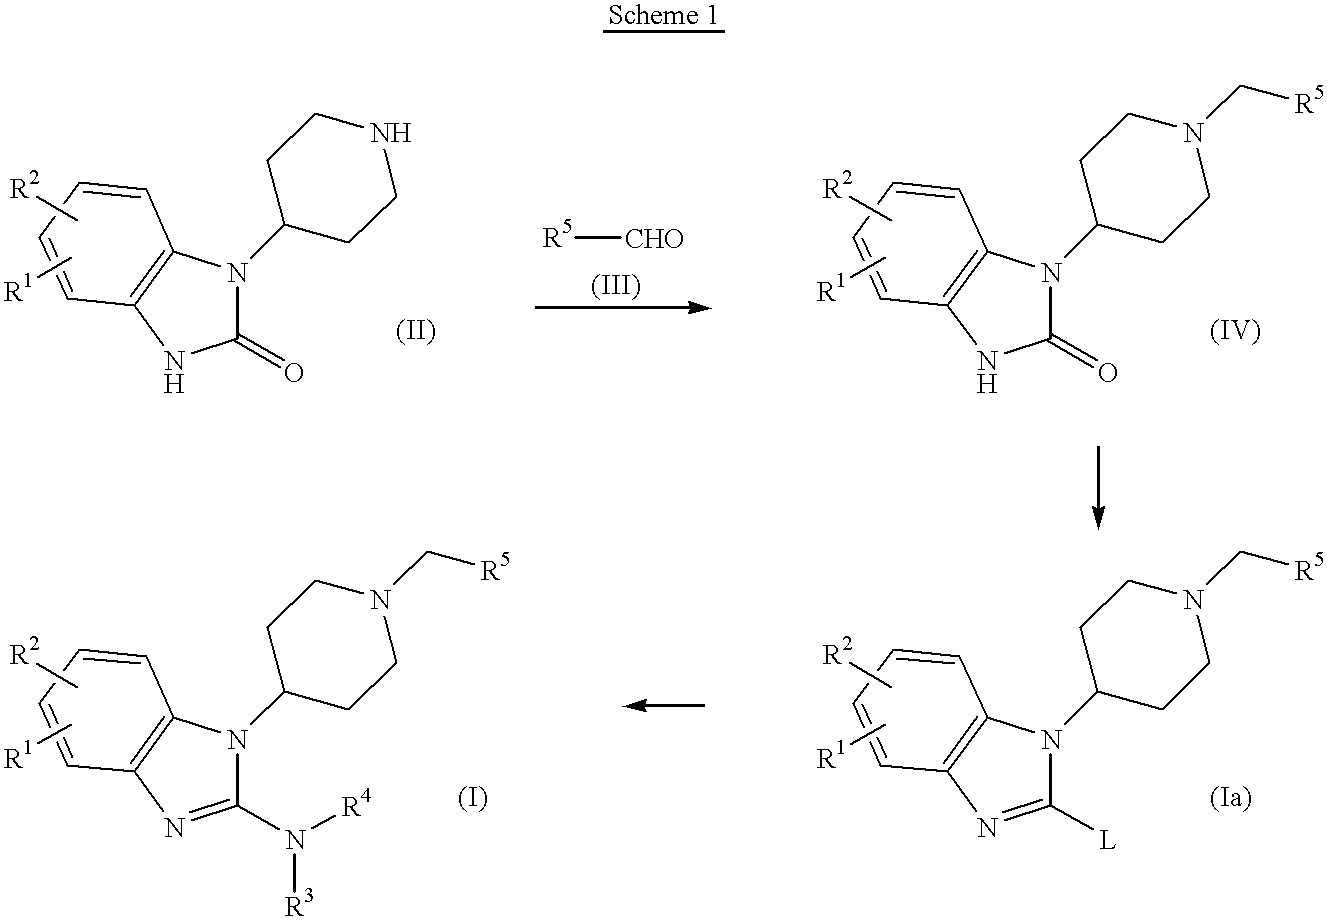 2-benzimidazolylamine compounds as ORL-1-receptor agonists